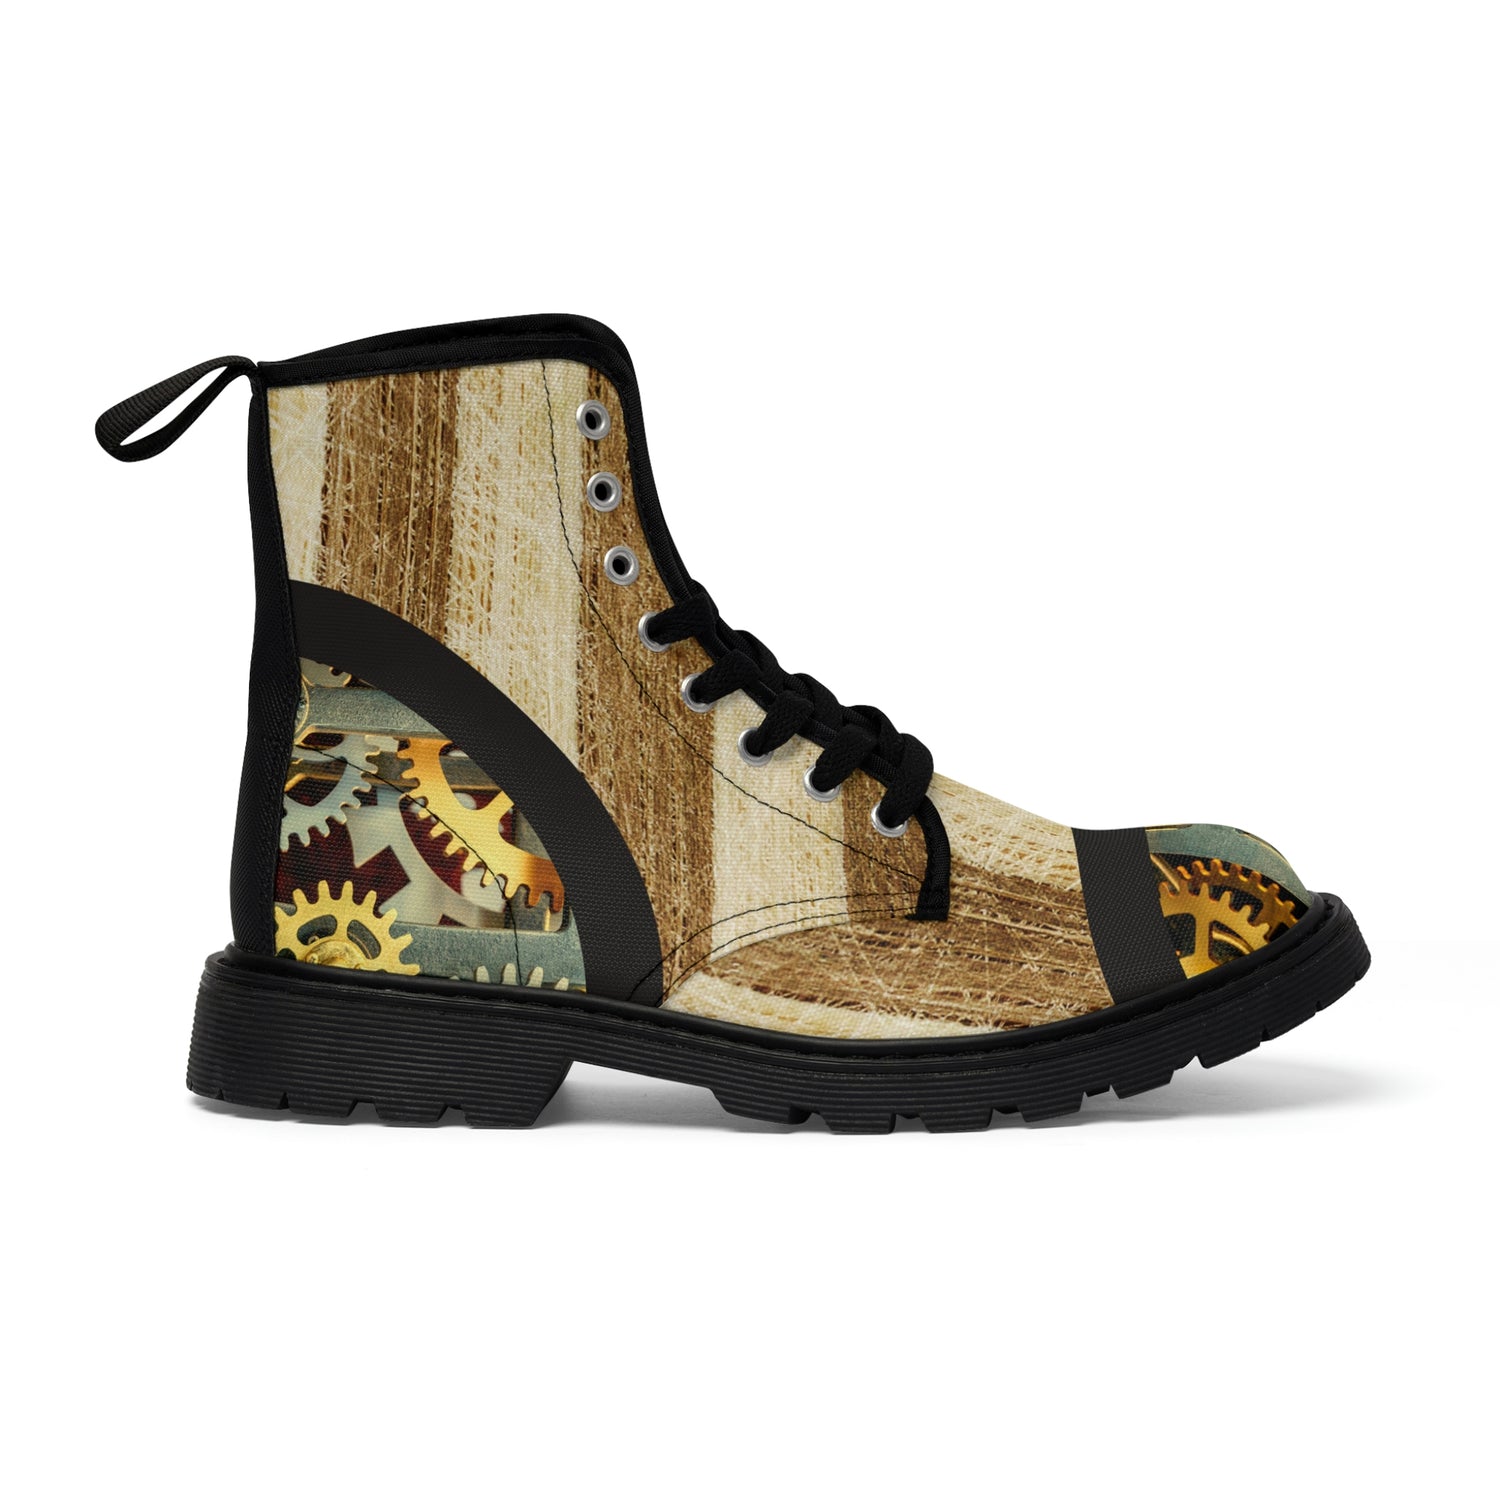 Men's Steampunk Gear Canvas Boots Lord and Lady Towers